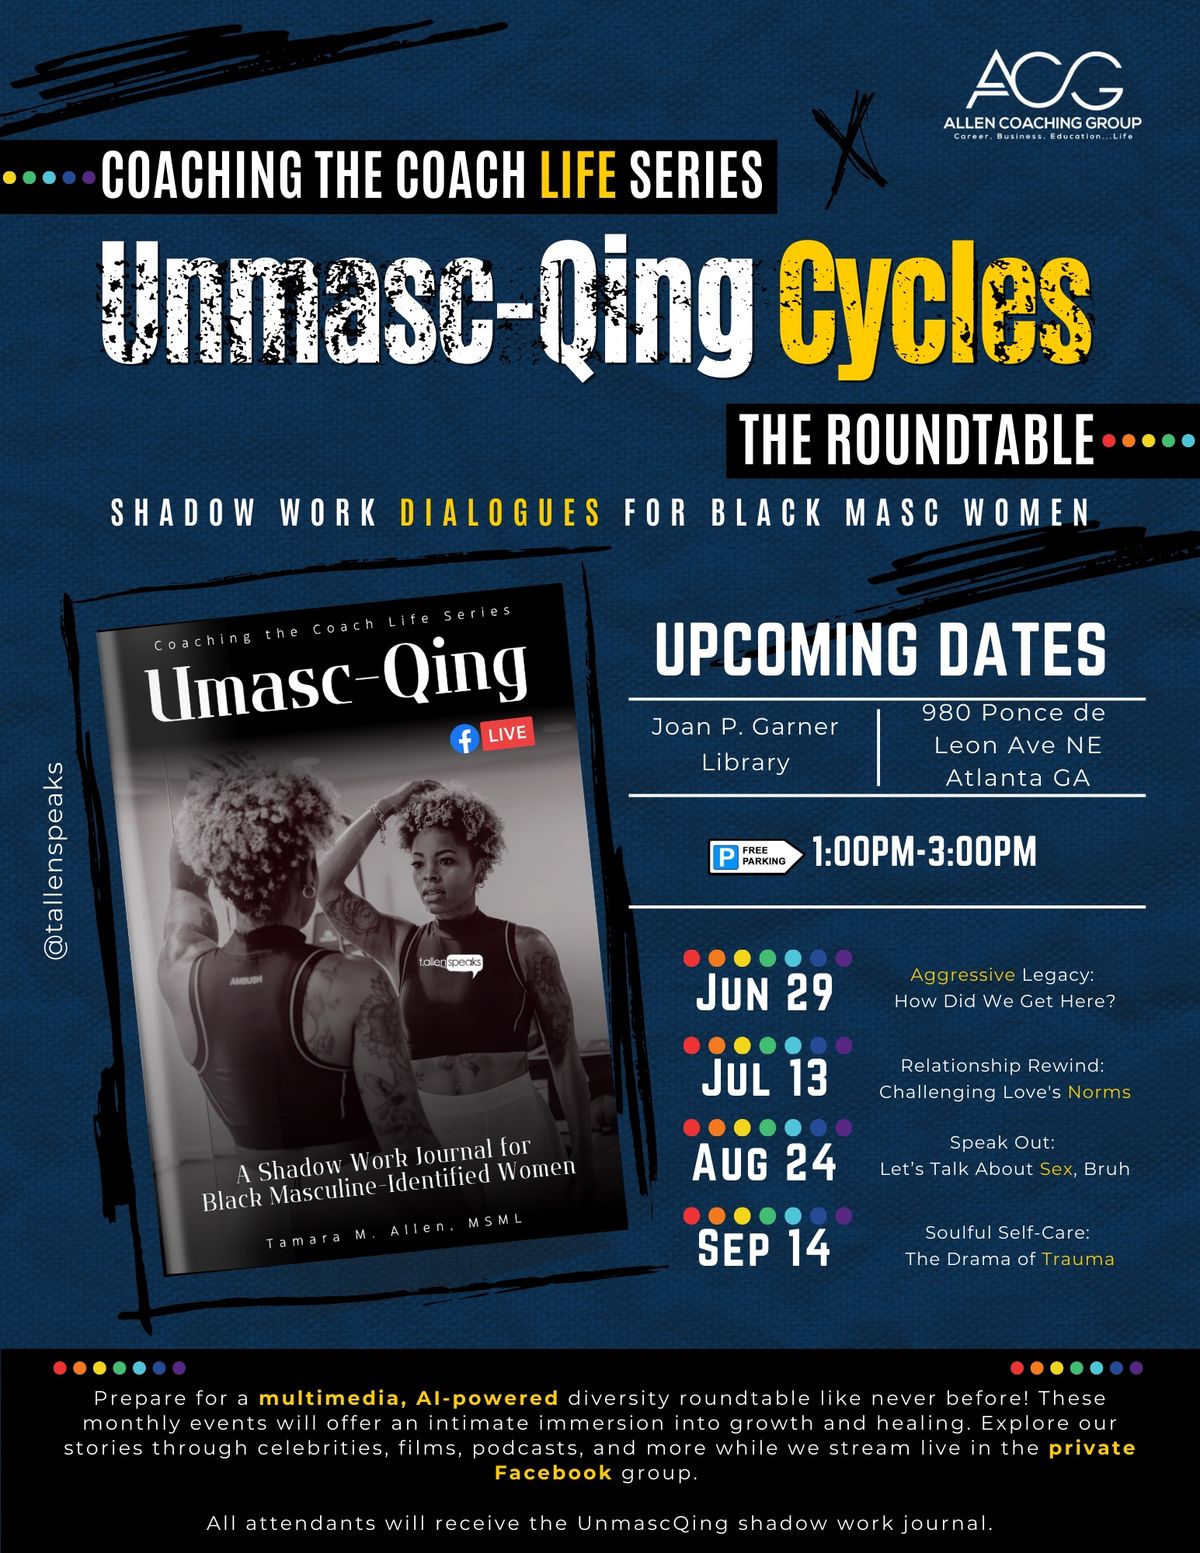 Unmasc-Qing Cycles: The Roundtable for MOC Women